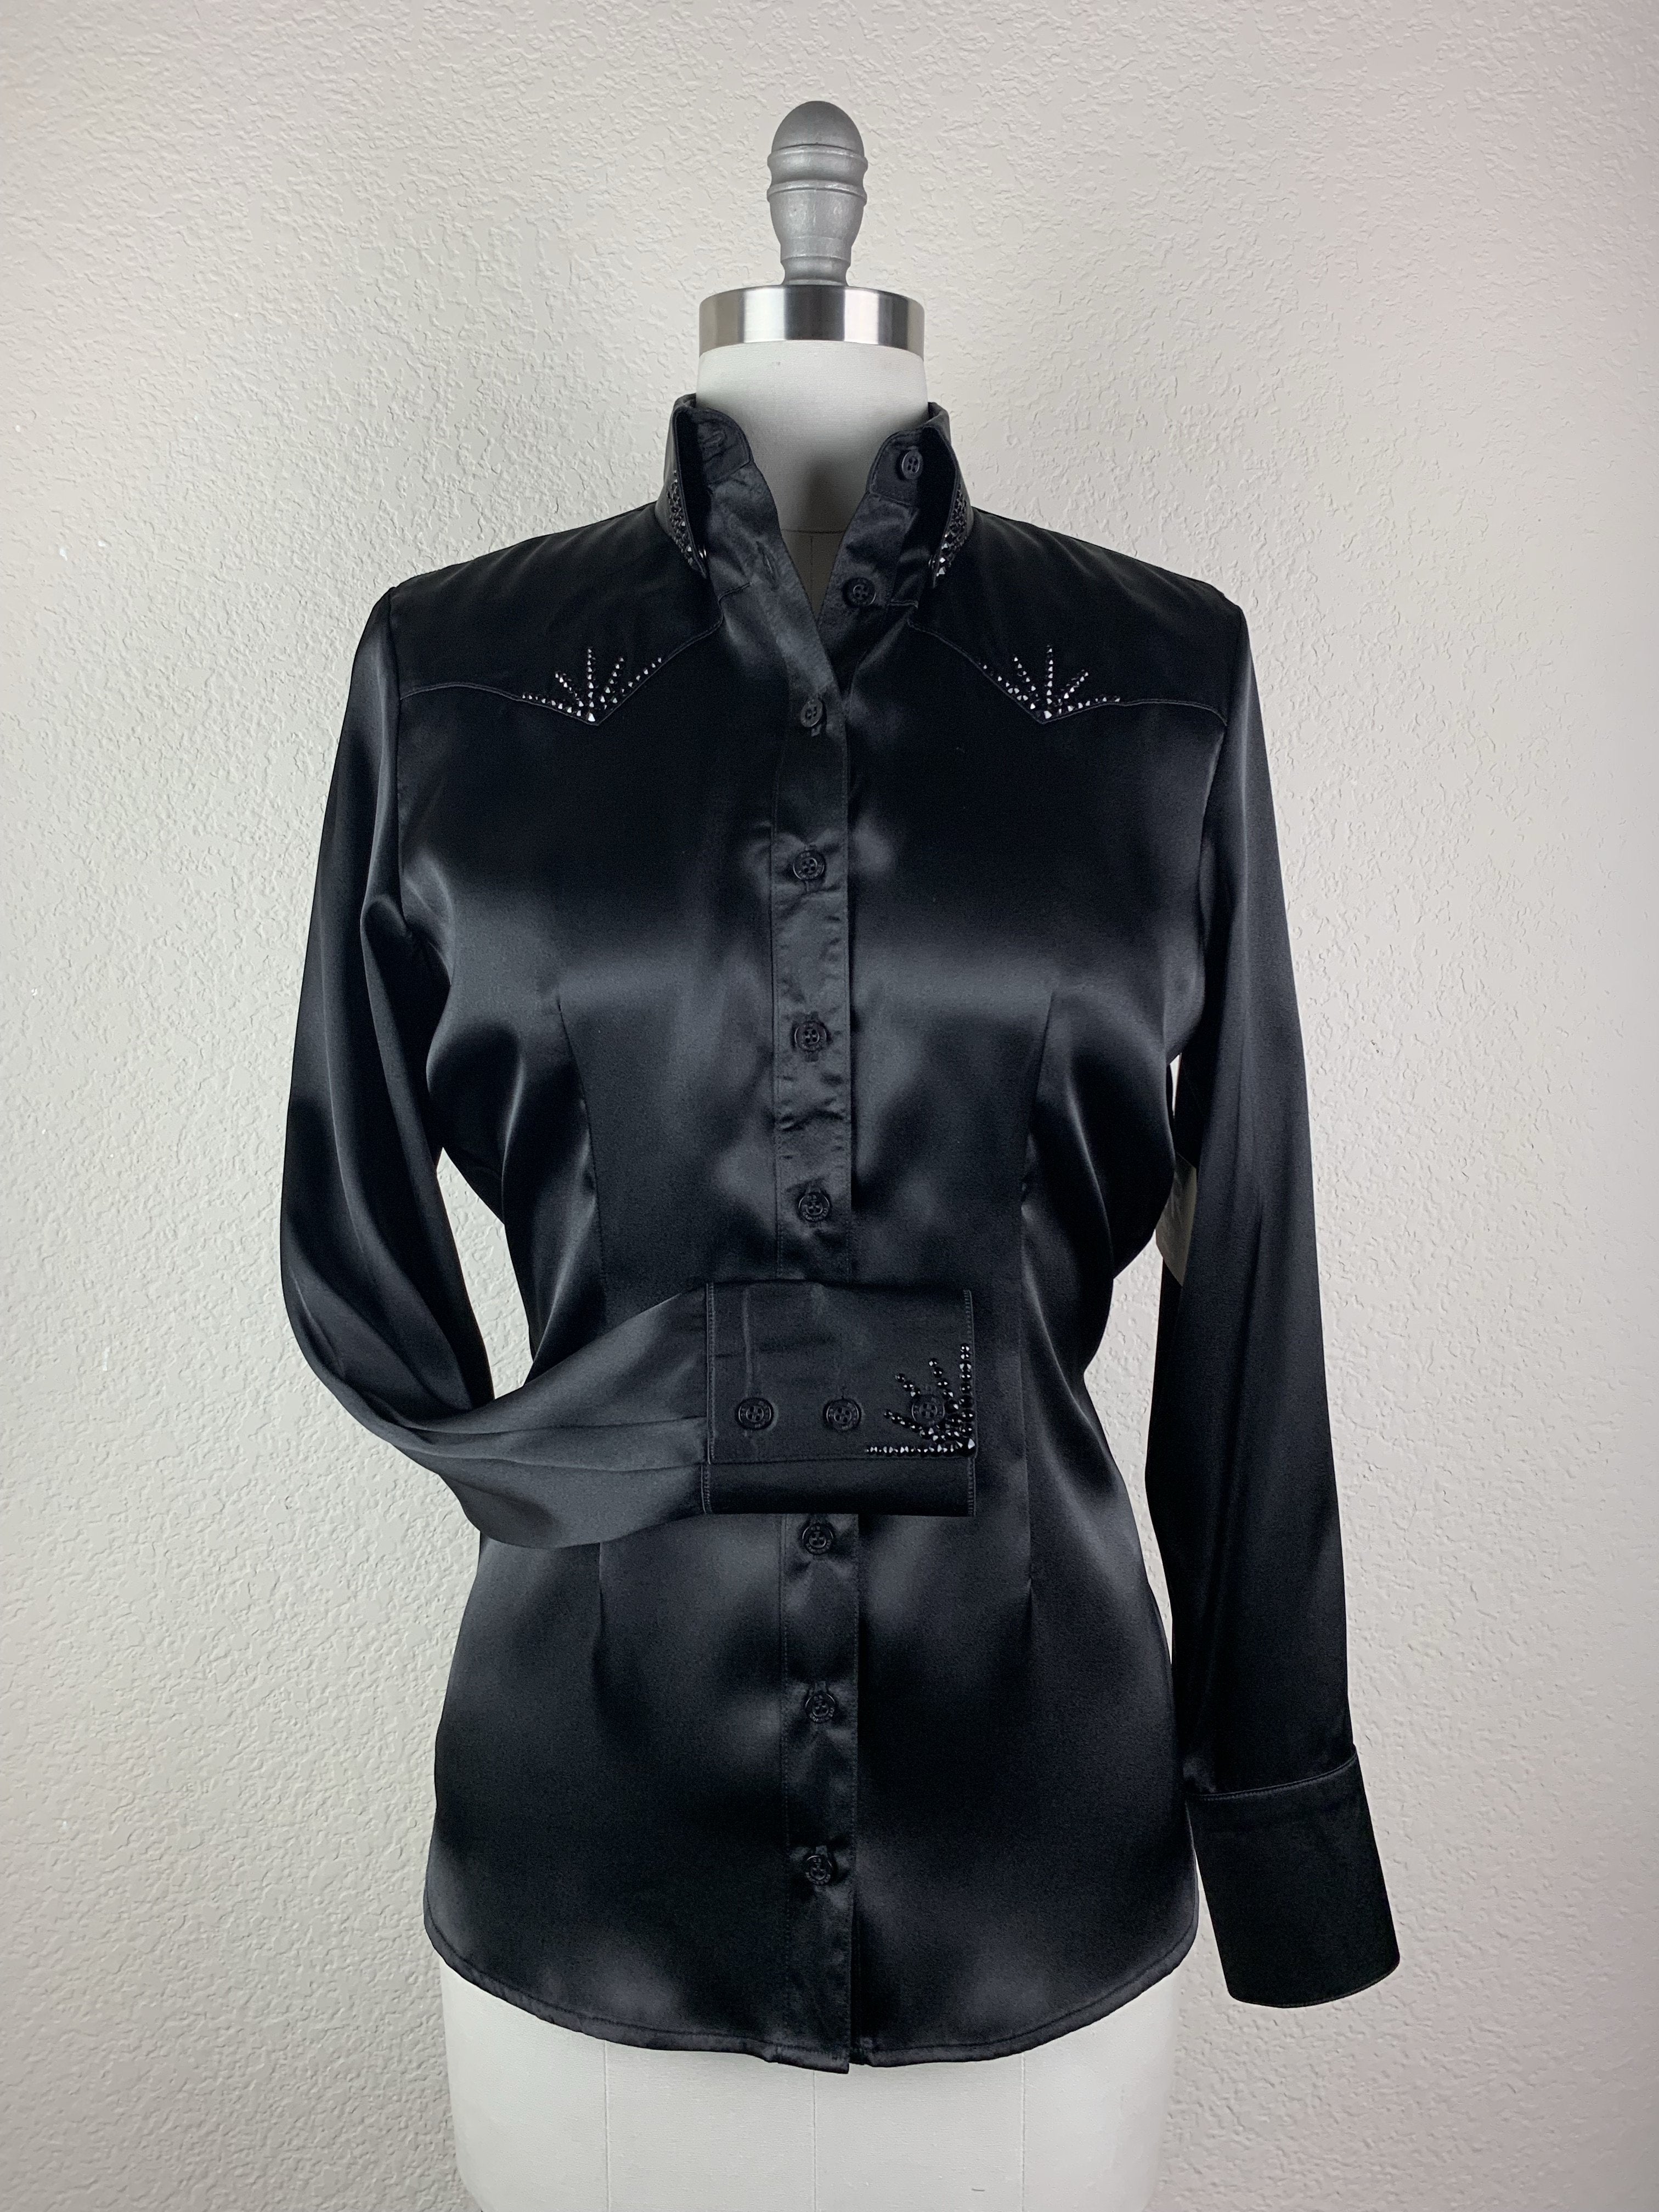 Buy CR Special Black Satin at CR RanchWear for only $399.00